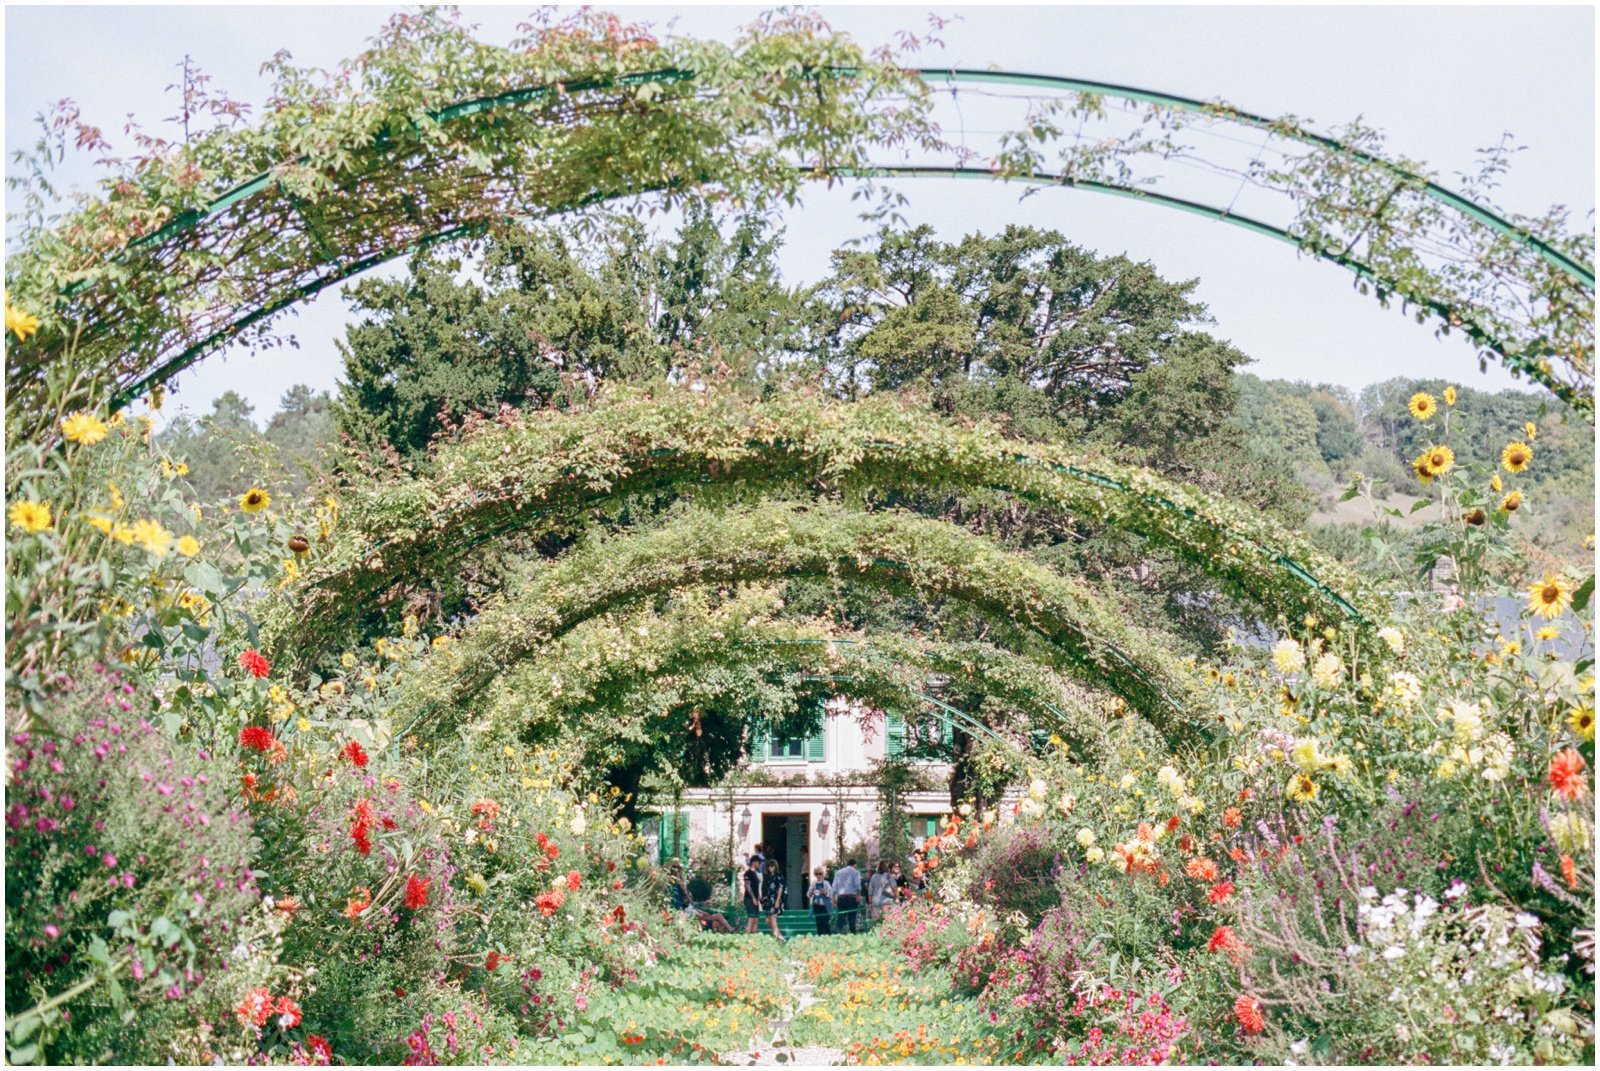 floral arches at monets garden in giverny france